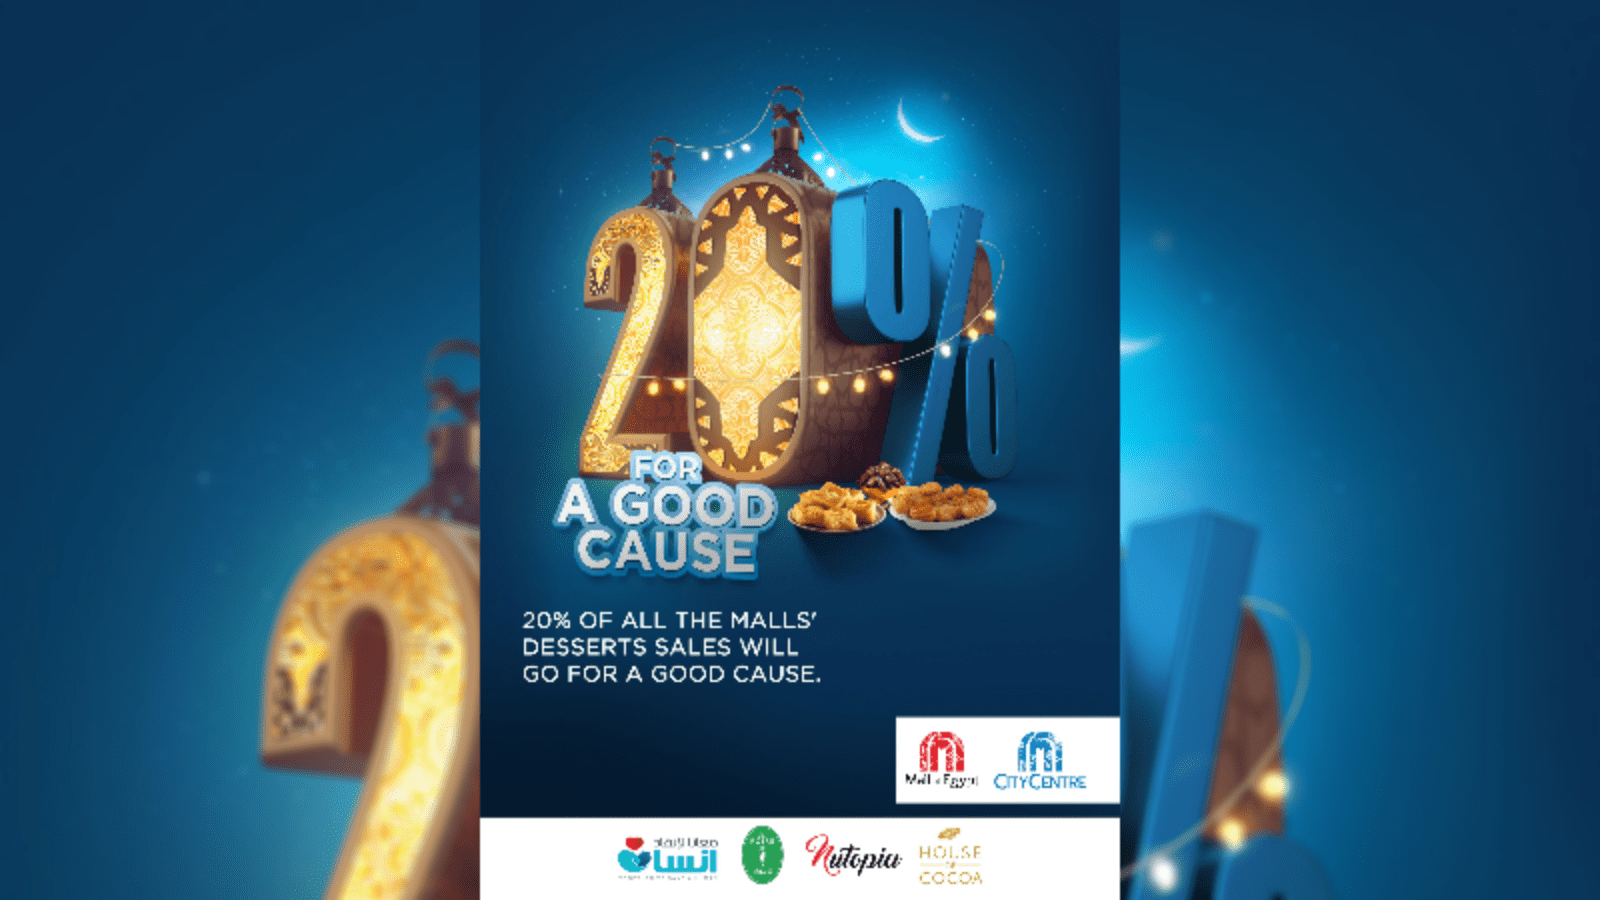 Majid Al Futtaim will let you have Desserts for a good cause!